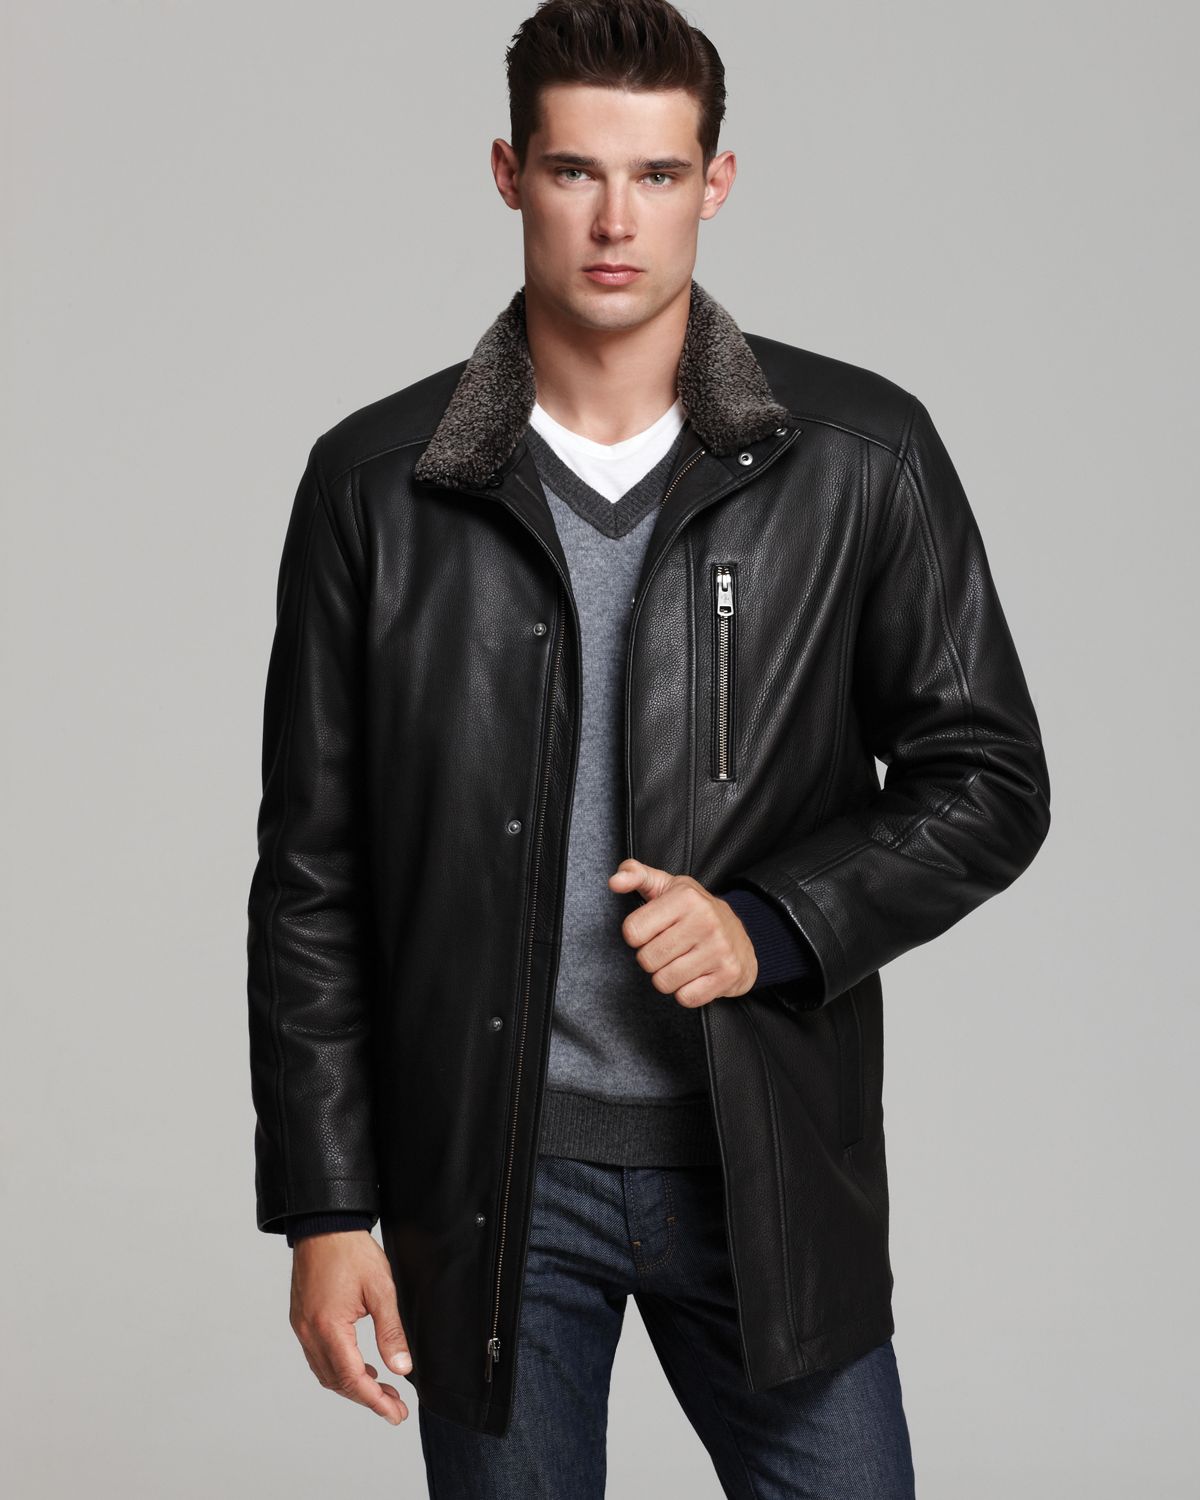 Cole Haan Leather Car Coat with Shearling Collar in Black for Men - Lyst